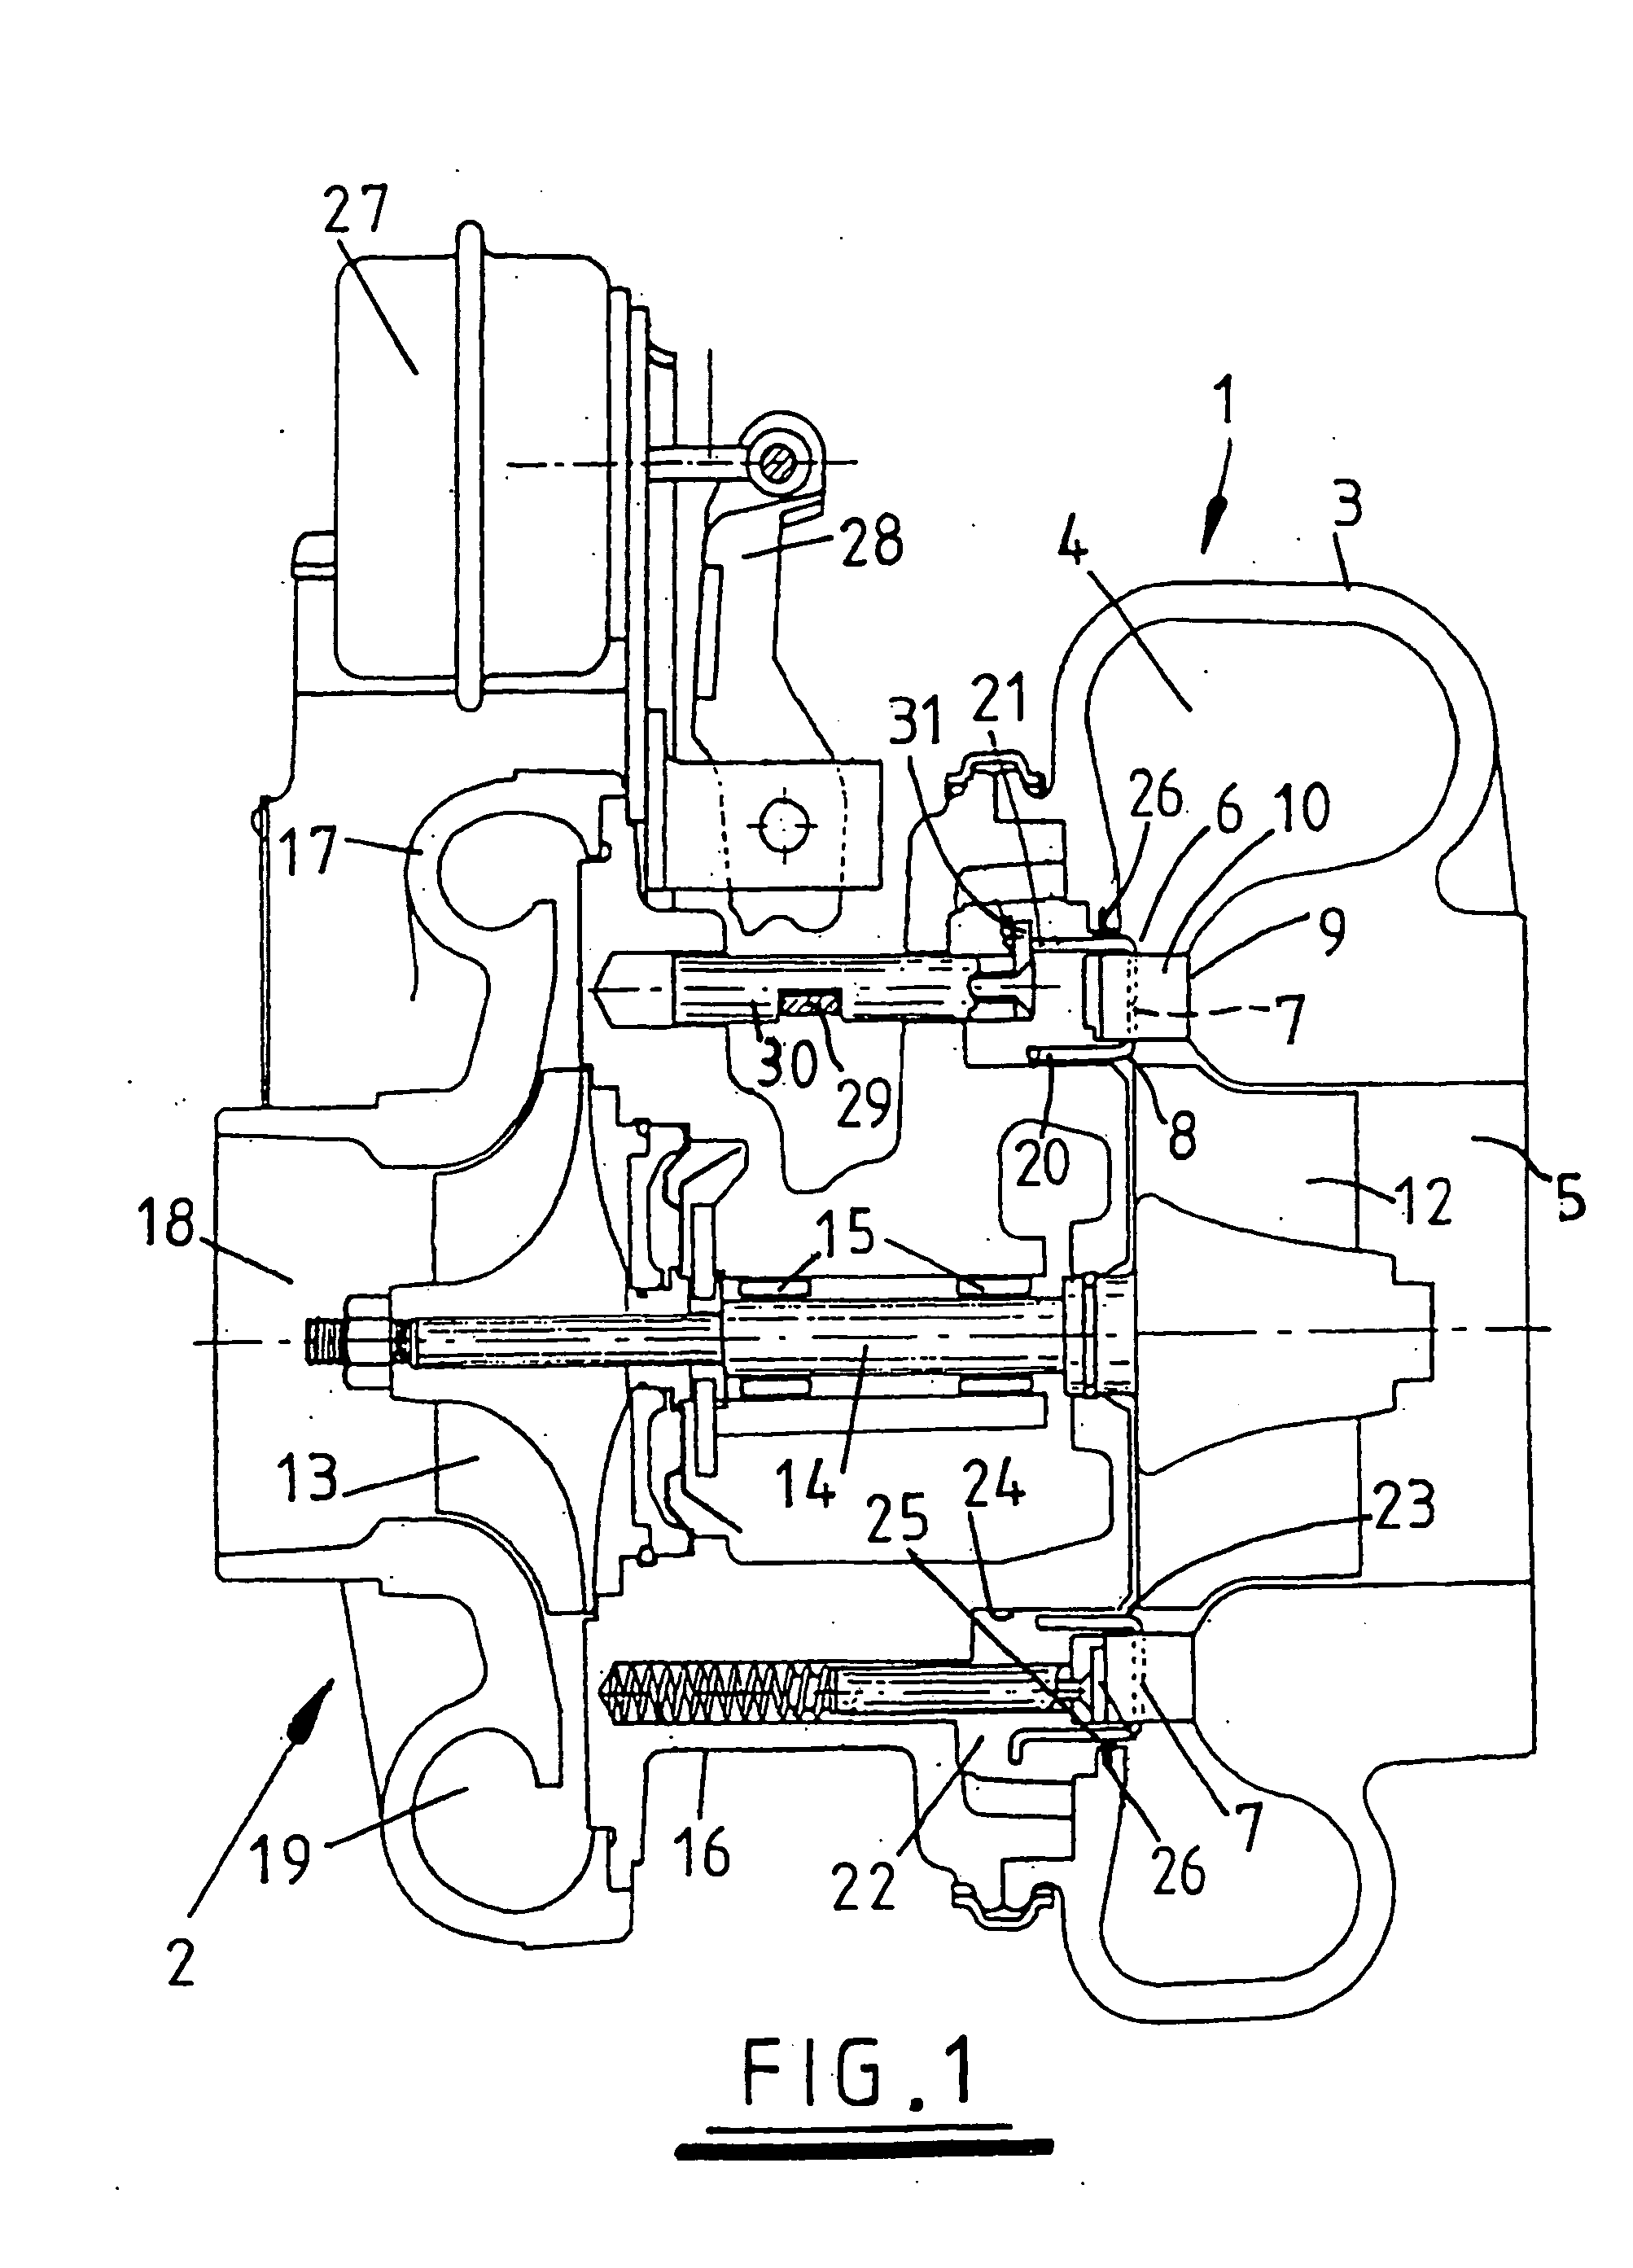 Method of controlling the exhaust gas temperature for after-treatment systems on a diesel engine using a variable geometry turbine